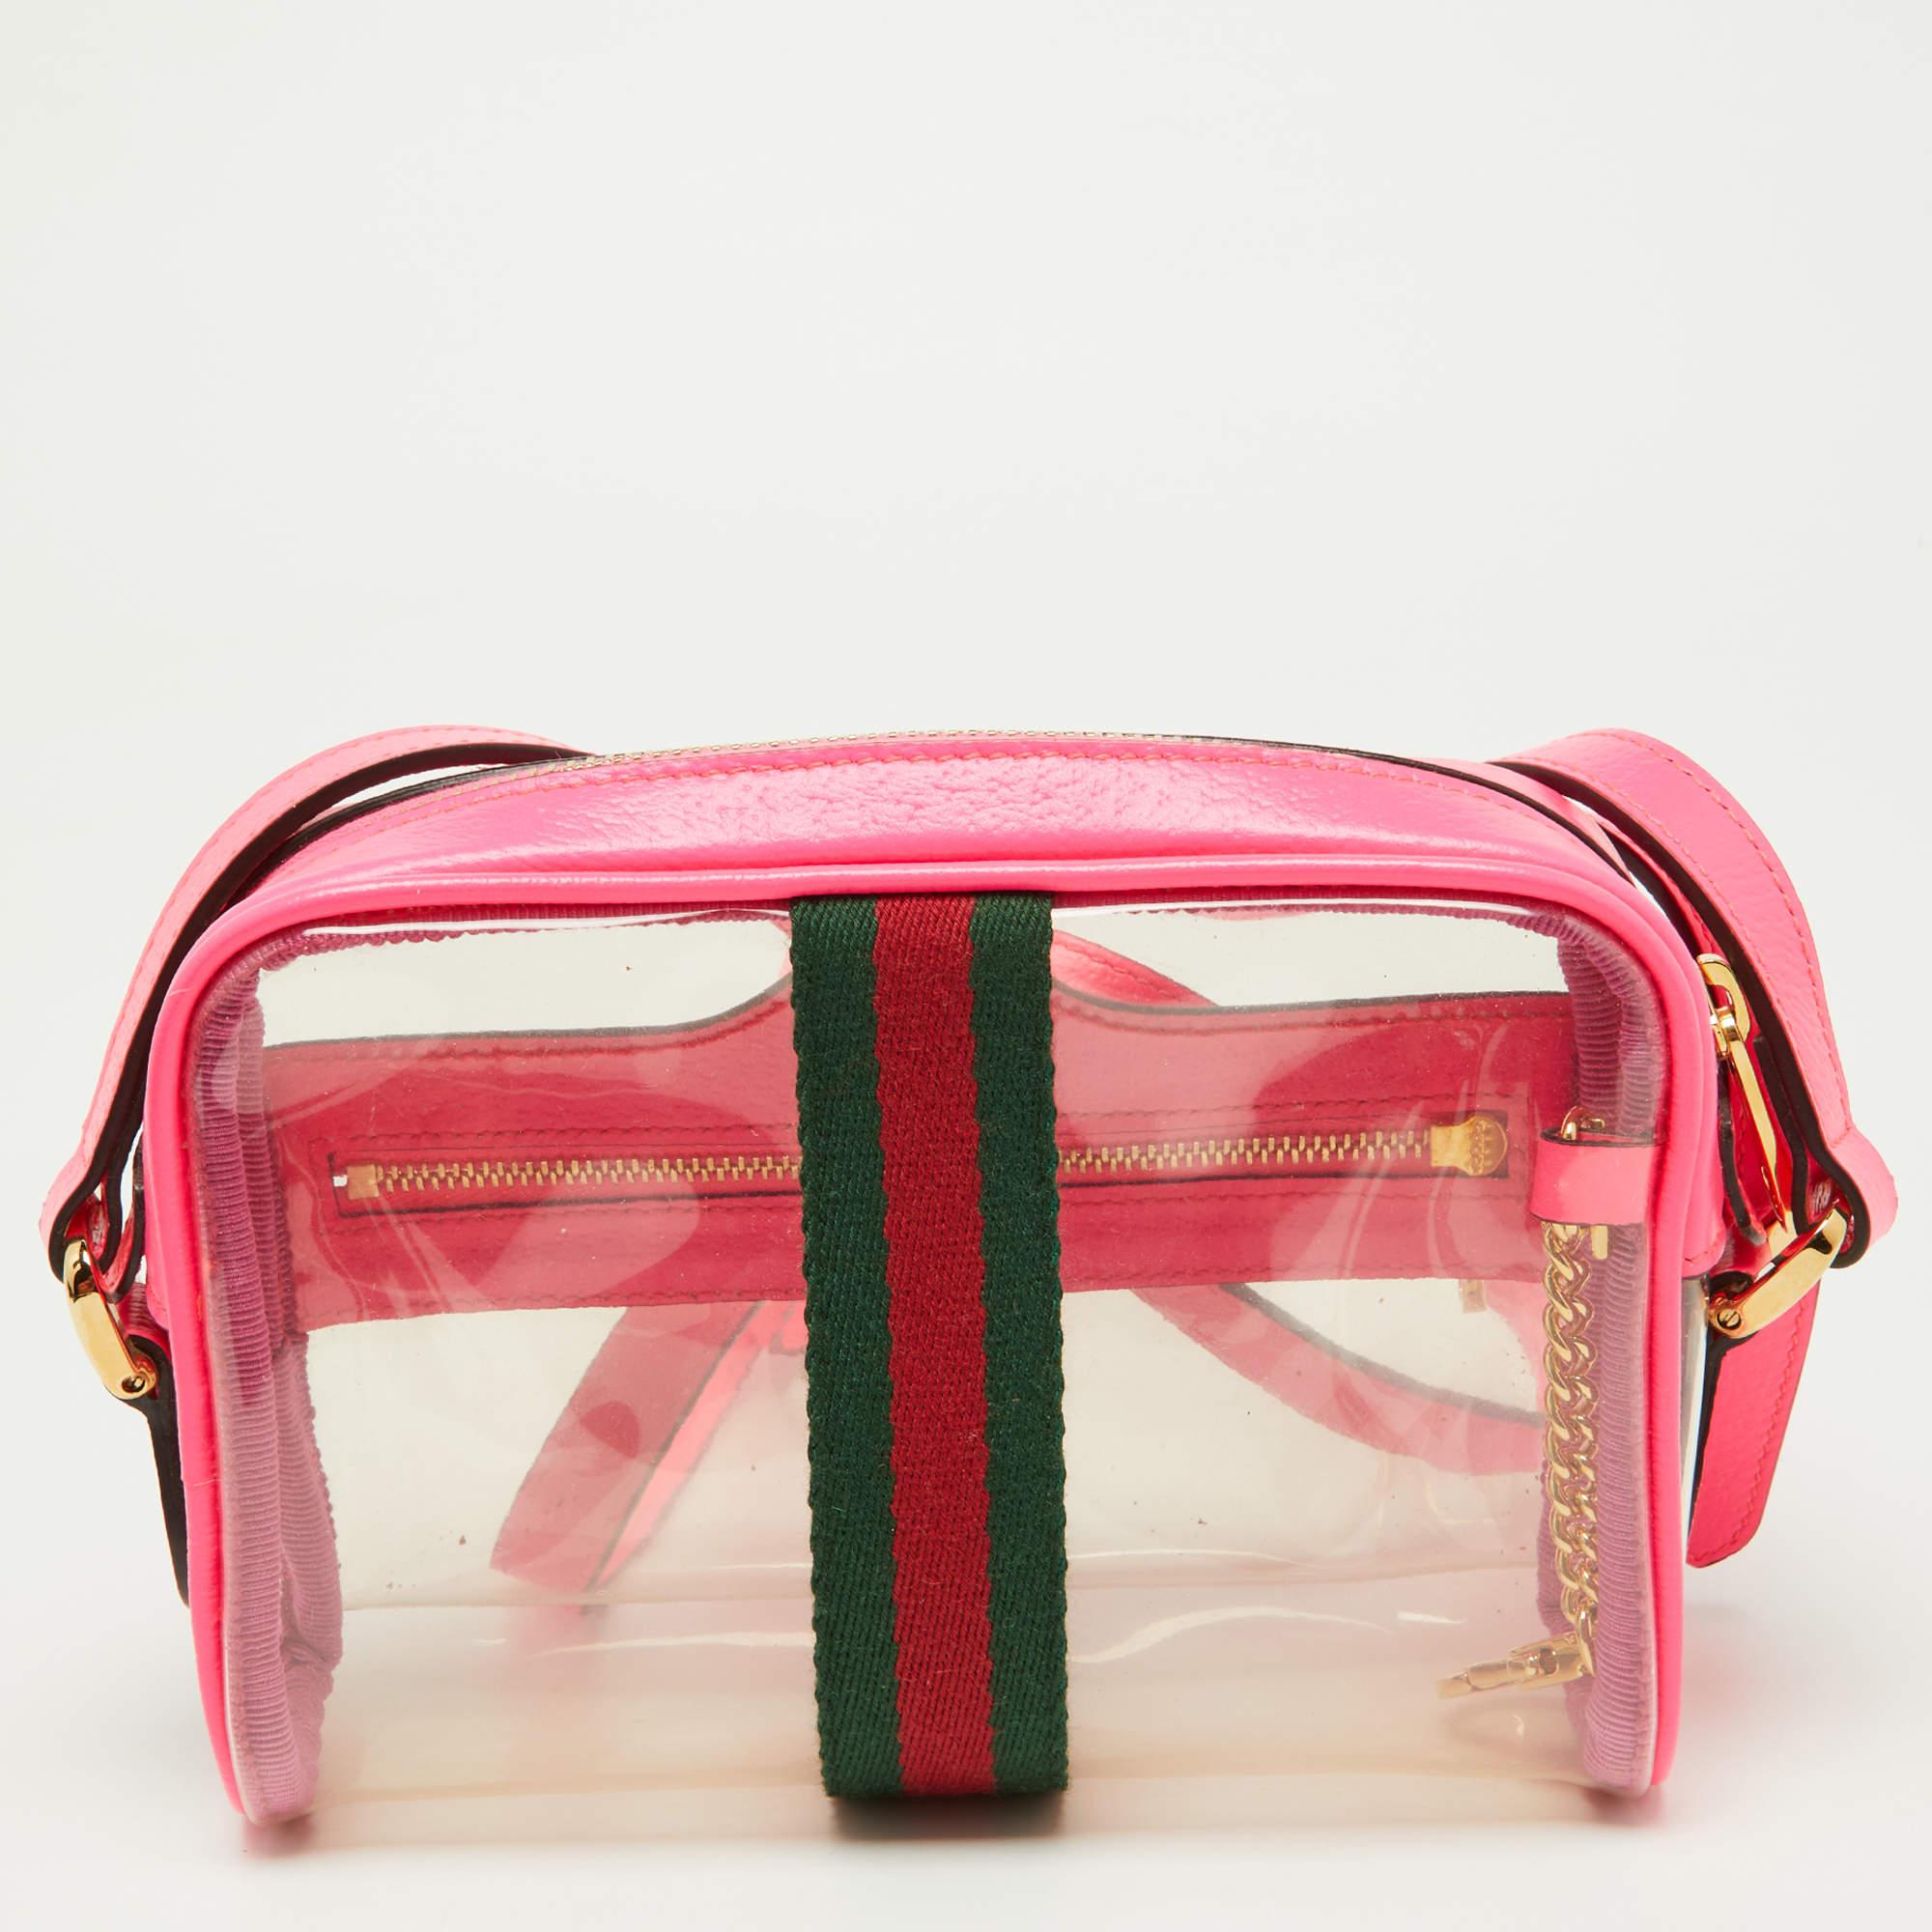 The Gucci Ophidia crossbody bag is a compact yet stylish accessory. It comes in PVC and neon pink leather, and a long strap for versatile wear. This bag effortlessly blends luxury and fashion-forward design.

